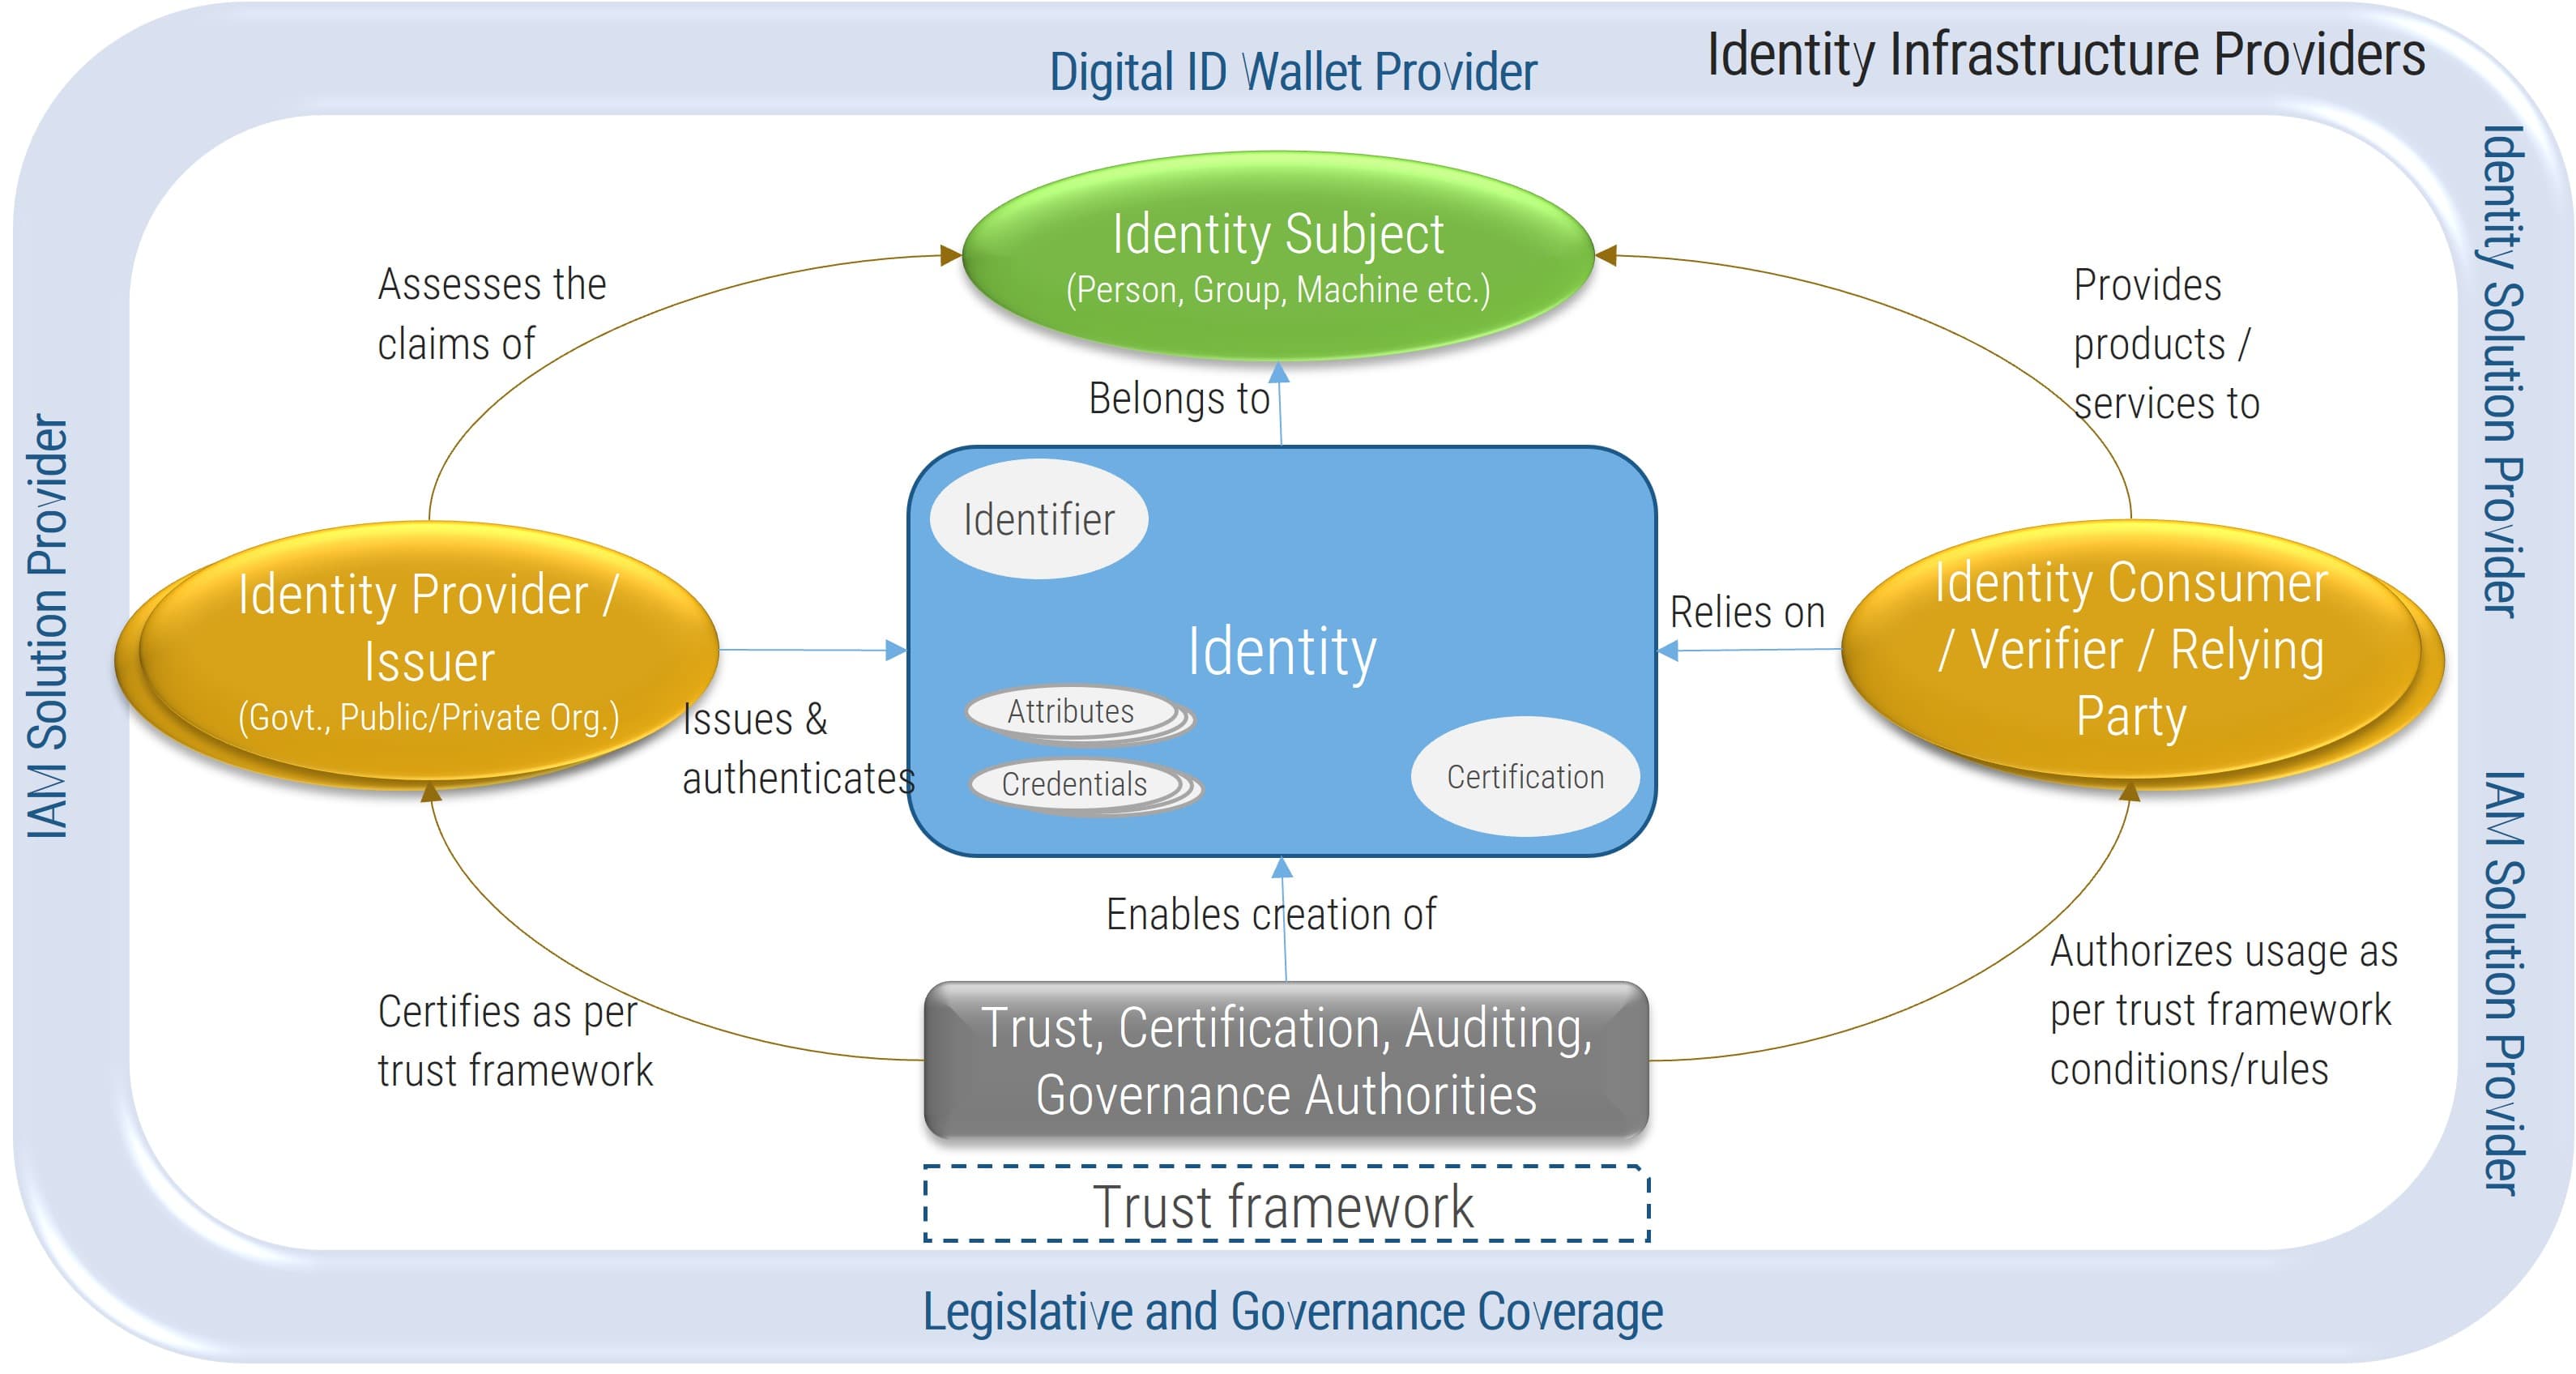 The image contains a screenshot of a digital identity ecosystem diagram.